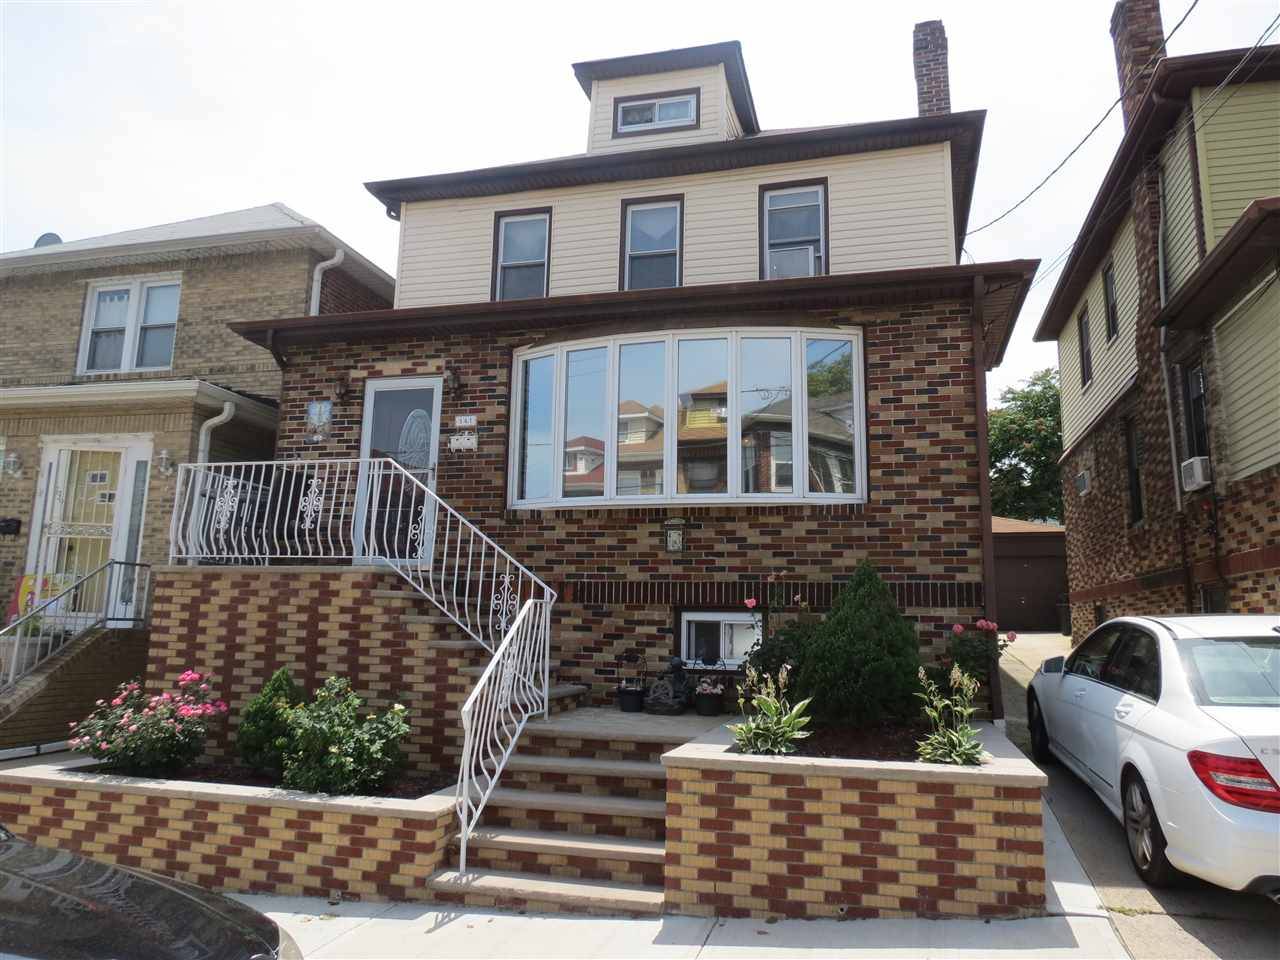 Beautiful 1 family home in the heart of North Bergen a block from James Braddock park